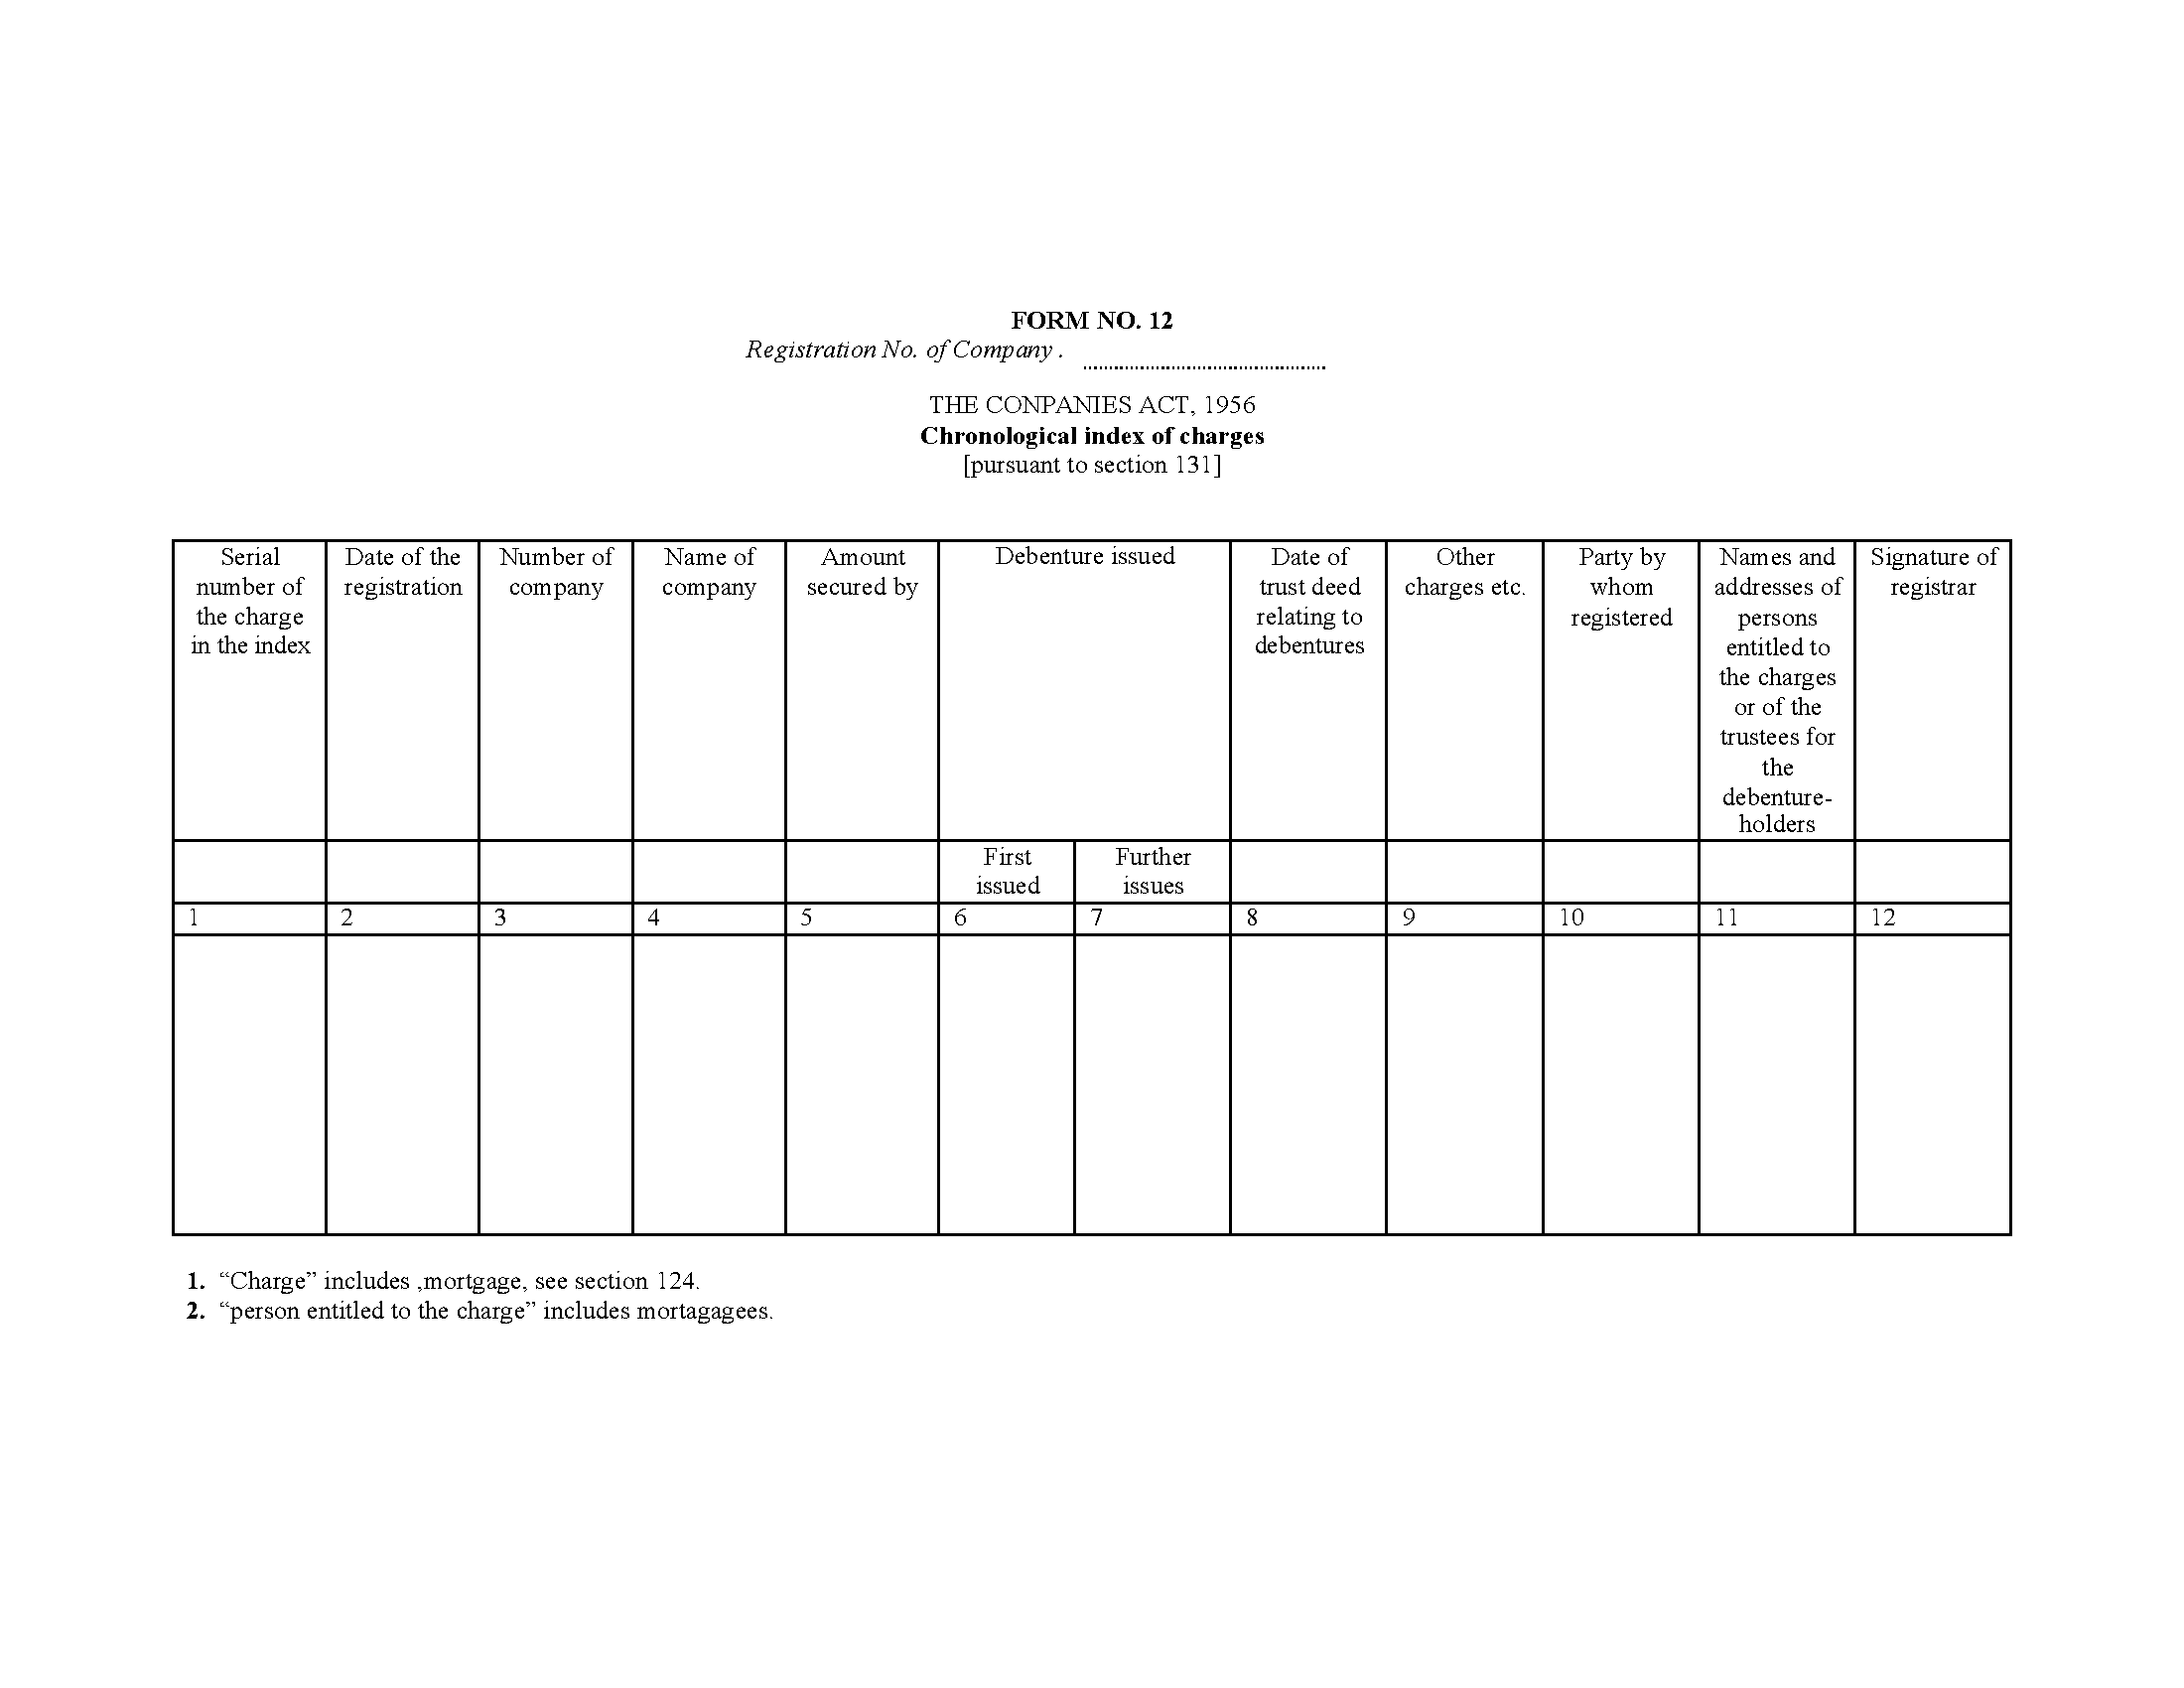 19 - FORM NO. 12 Chronological index of charges [pursuant to section 131]-converted